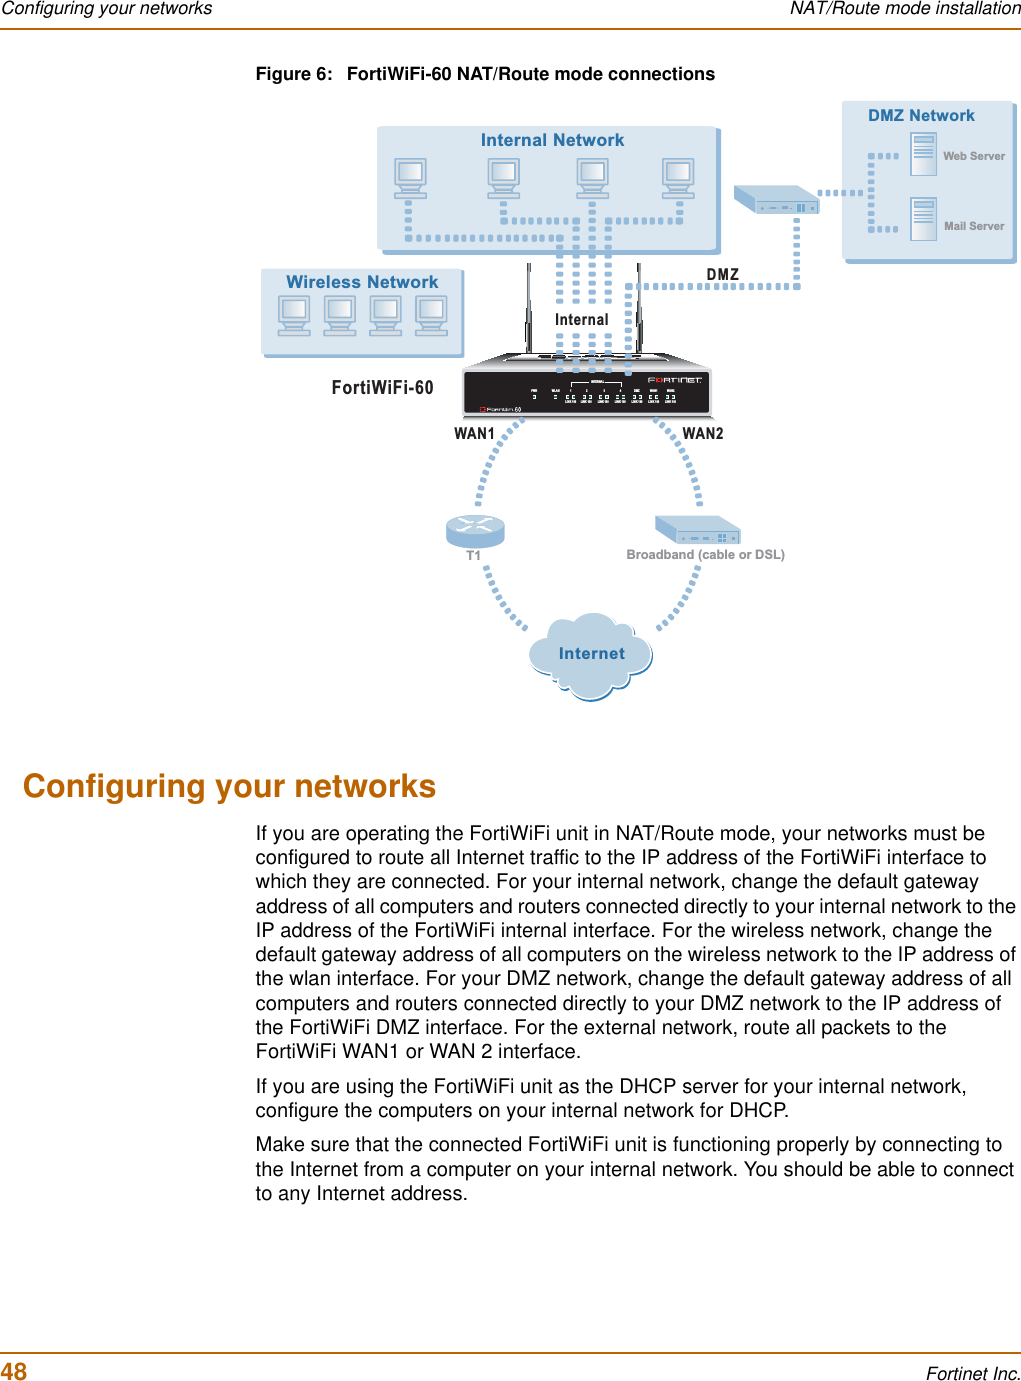 48 Fortinet Inc.Configuring your networks NAT/Route mode installationFigure 6: FortiWiFi-60 NAT/Route mode connectionsConfiguring your networksIf you are operating the FortiWiFi unit in NAT/Route mode, your networks must be configured to route all Internet traffic to the IP address of the FortiWiFi interface to which they are connected. For your internal network, change the default gateway address of all computers and routers connected directly to your internal network to the IP address of the FortiWiFi internal interface. For the wireless network, change the default gateway address of all computers on the wireless network to the IP address of the wlan interface. For your DMZ network, change the default gateway address of all computers and routers connected directly to your DMZ network to the IP address of the FortiWiFi DMZ interface. For the external network, route all packets to the FortiWiFi WAN1 or WAN 2 interface.If you are using the FortiWiFi unit as the DHCP server for your internal network, configure the computers on your internal network for DHCP.Make sure that the connected FortiWiFi unit is functioning properly by connecting to the Internet from a computer on your internal network. You should be able to connect to any Internet address.INTERNALDMZ4321LINK 100 LINK 100 LINK 100 LINK 100 LINK 100 LINK 100 LINK 100WAN1 WAN 2PWR WLANFortiWiFi-60DMZDMZ NetworkMail ServerWeb ServerInternal NetworkWAN2WAN1InternetBroadband (cable or DSL)T1Wireless NetworkInternal